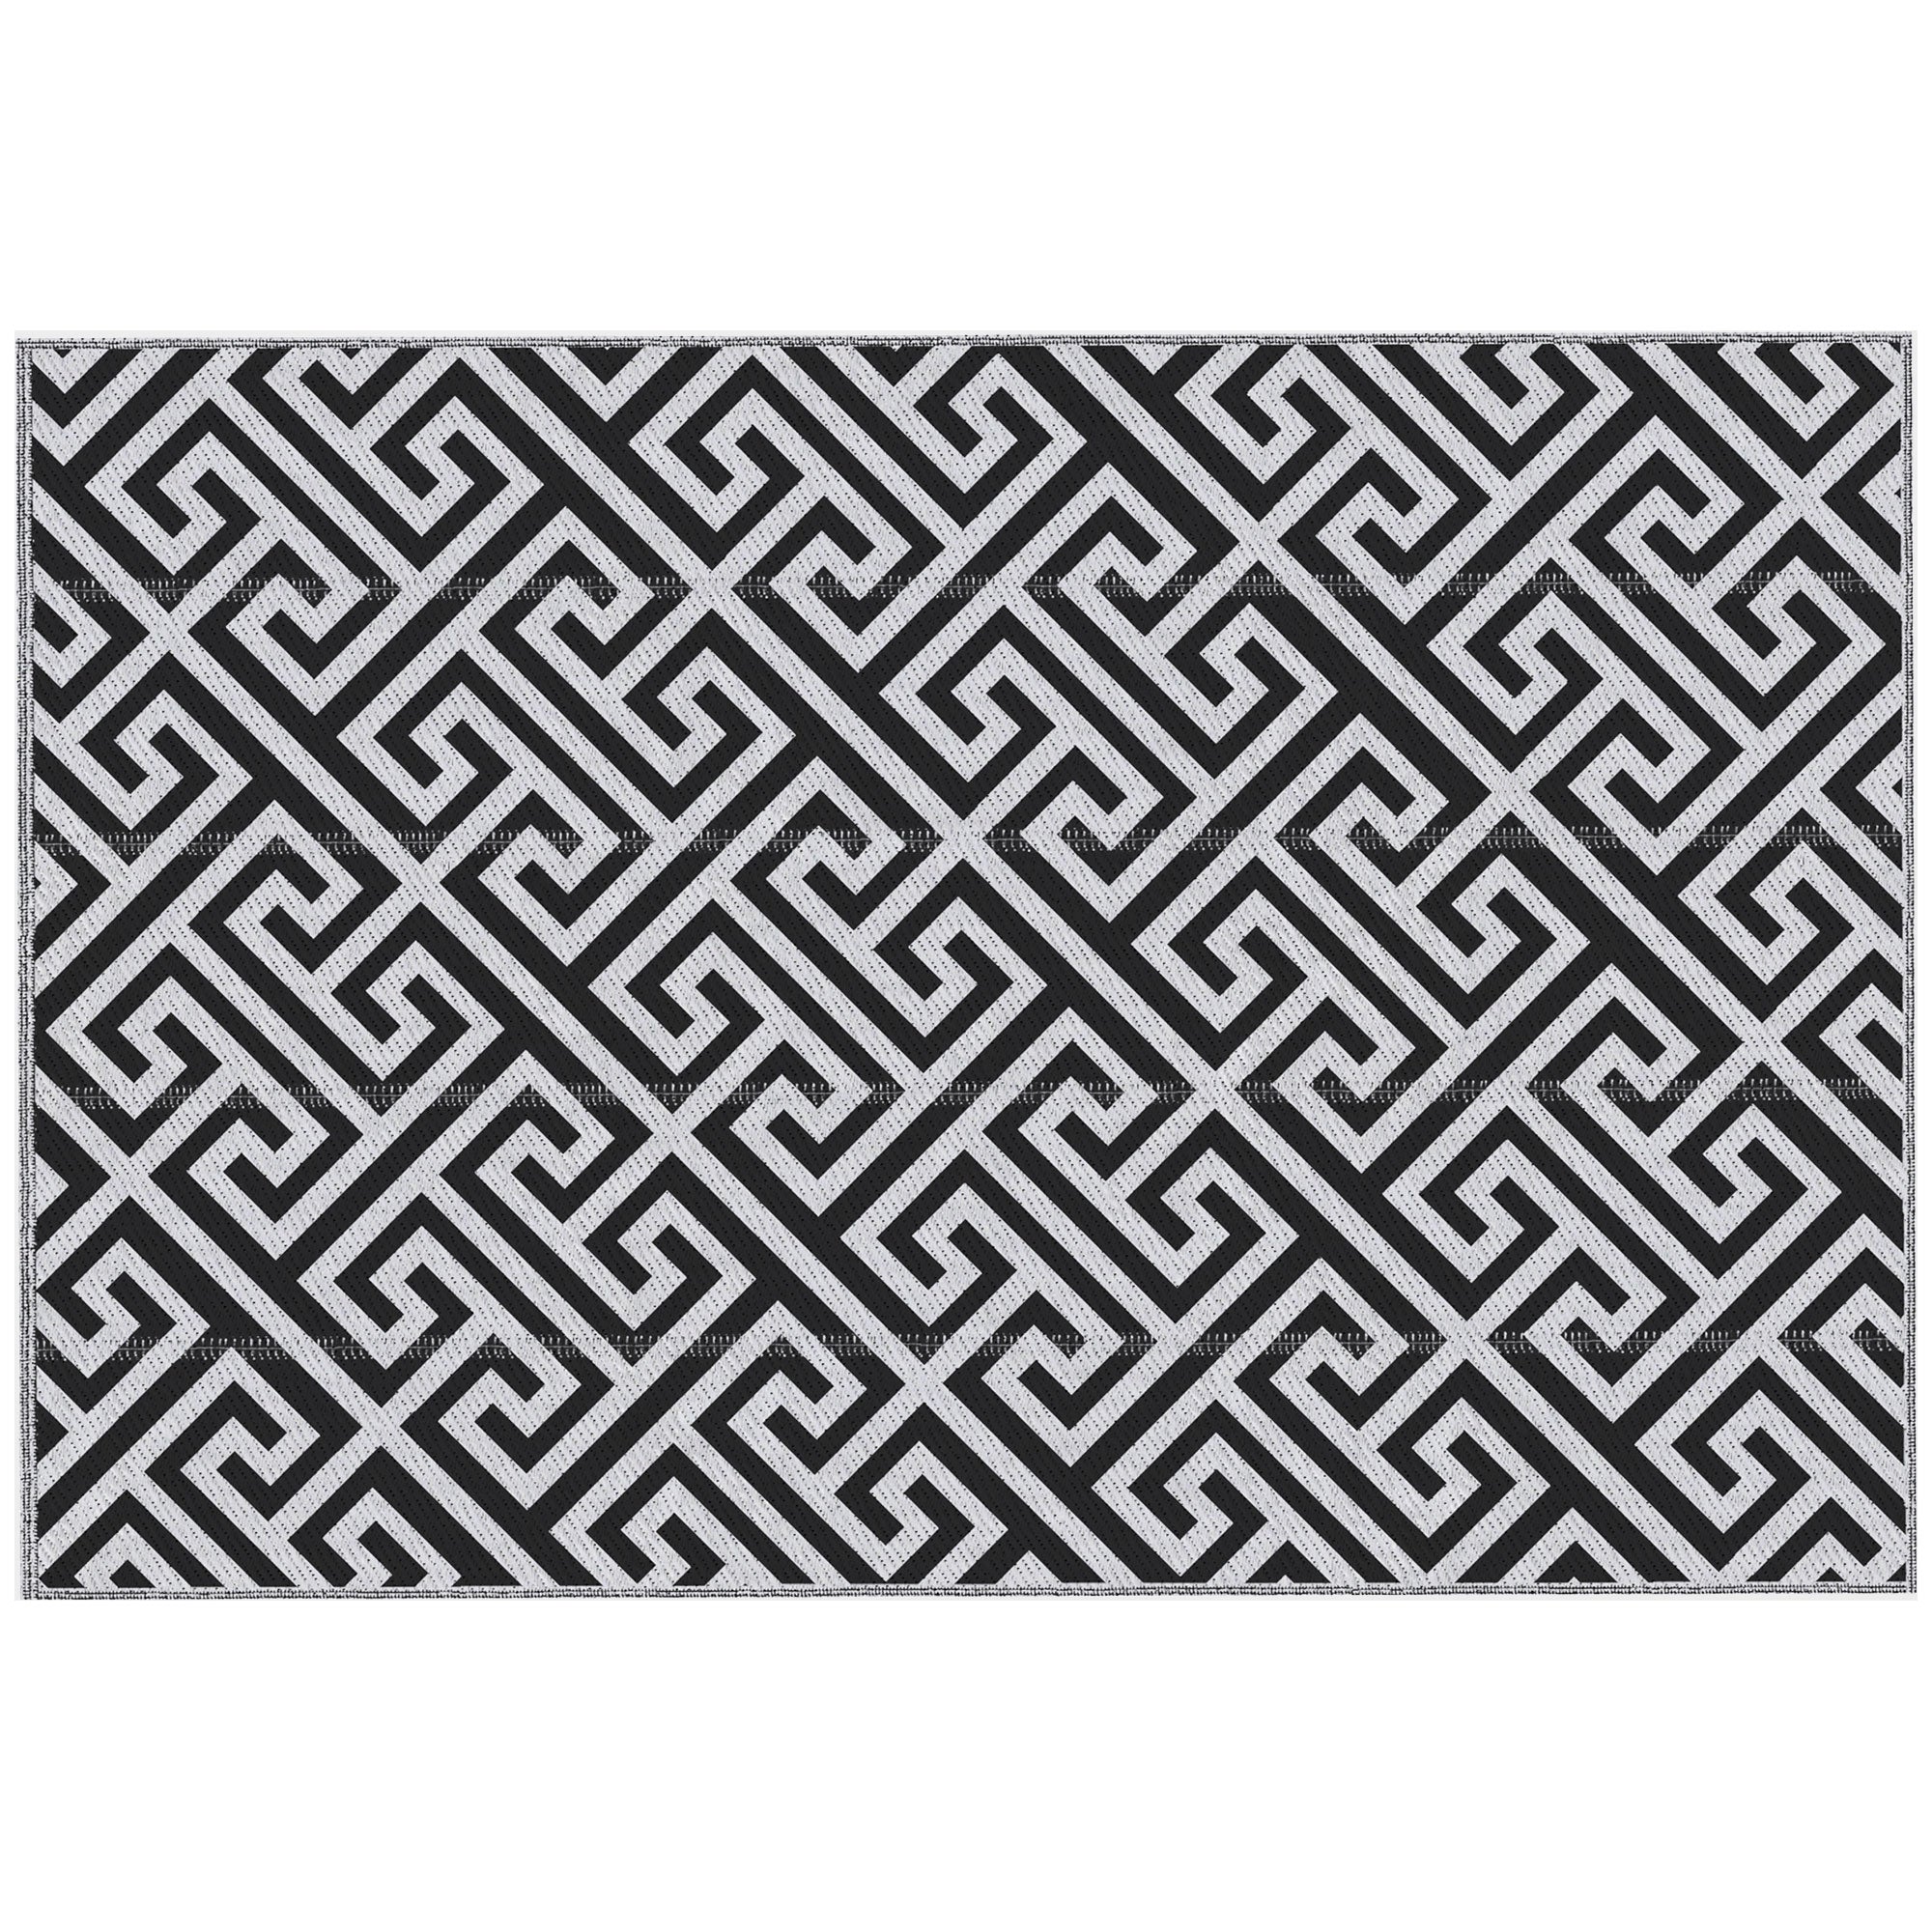 182 x 274 cm(6x9ft) Outdoor Rug Reversible Mat Plastic Straw Rug Portable RV Camping Mat for Garden Deck Picnic Indoor, Black & White-0